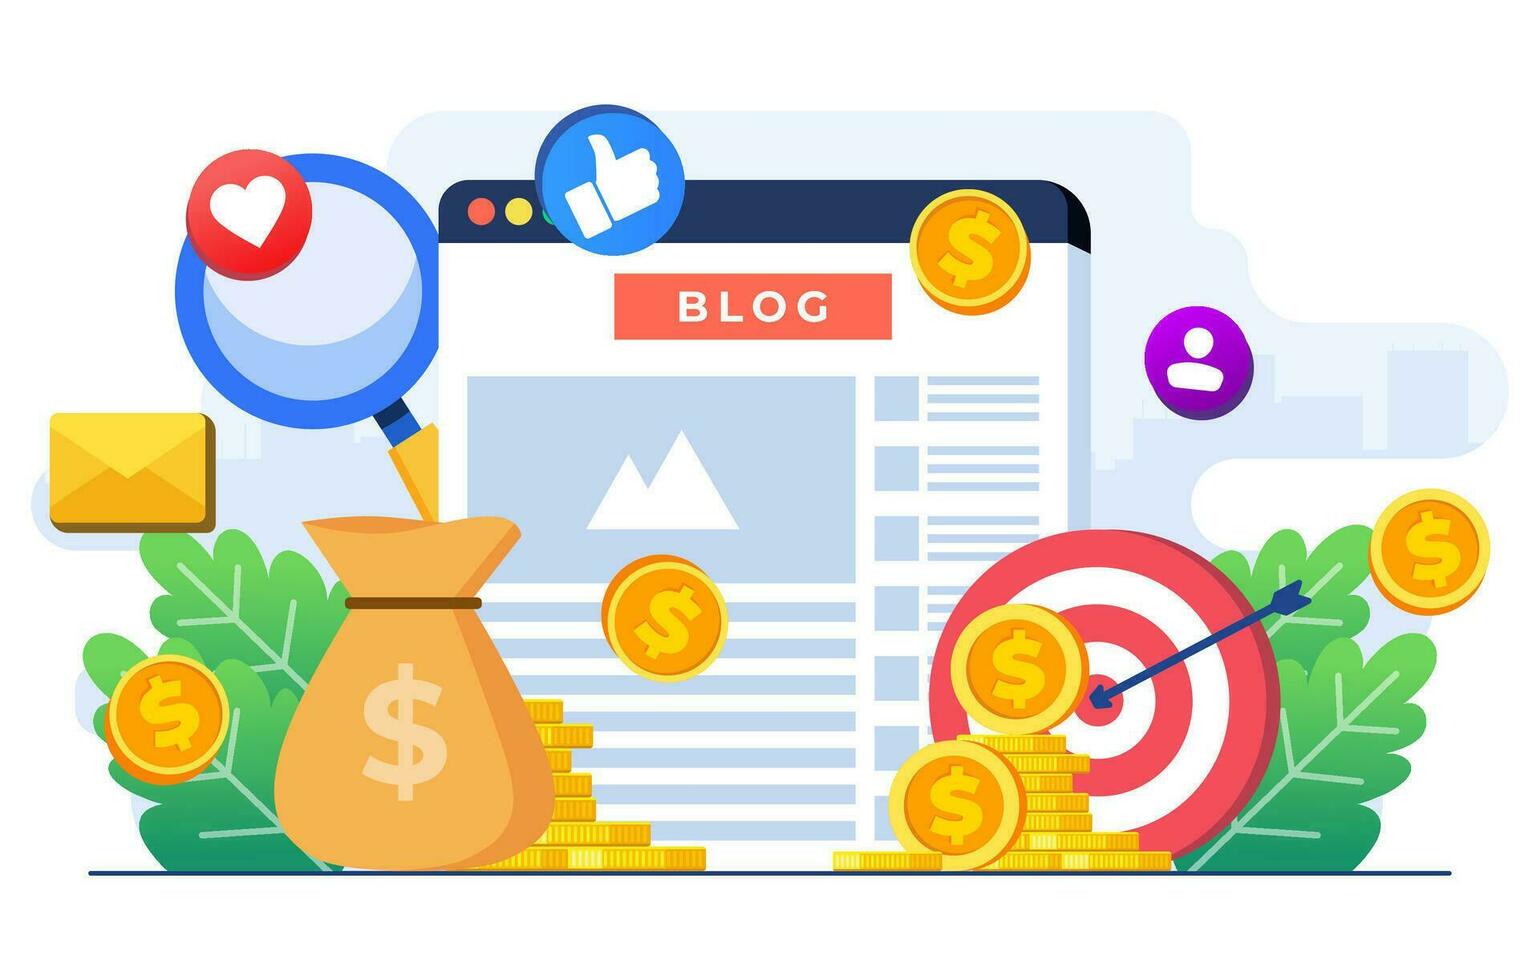 Blog monetization concept flat illustration vector template, Making money online, Website monetization, Analyzing blog content and generating income with ad placements and sponsor partnerships